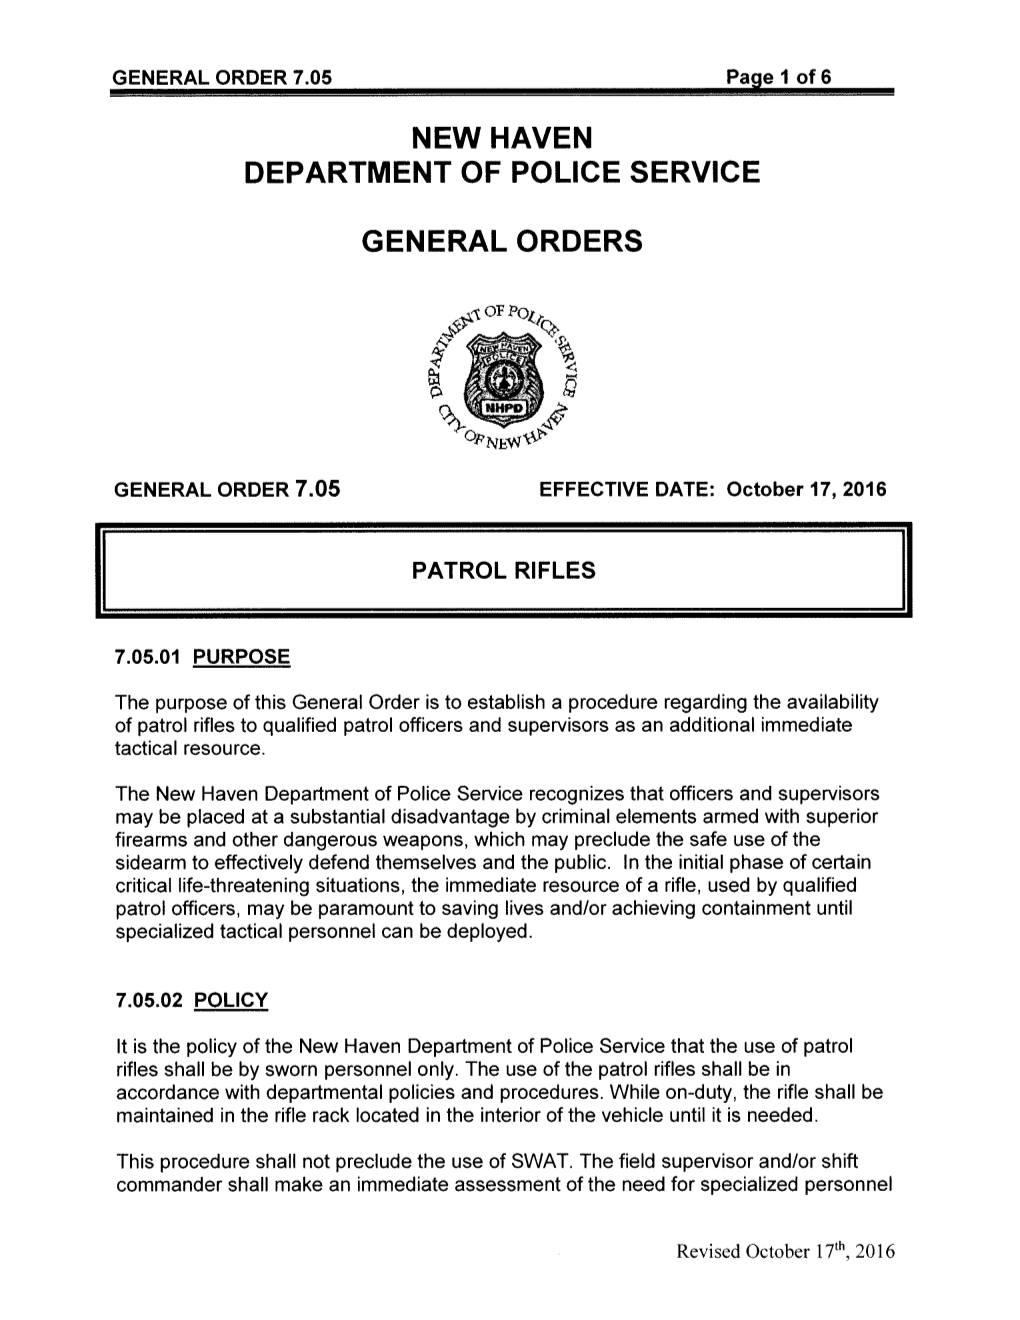 New Haven Department of Police Service General Orders